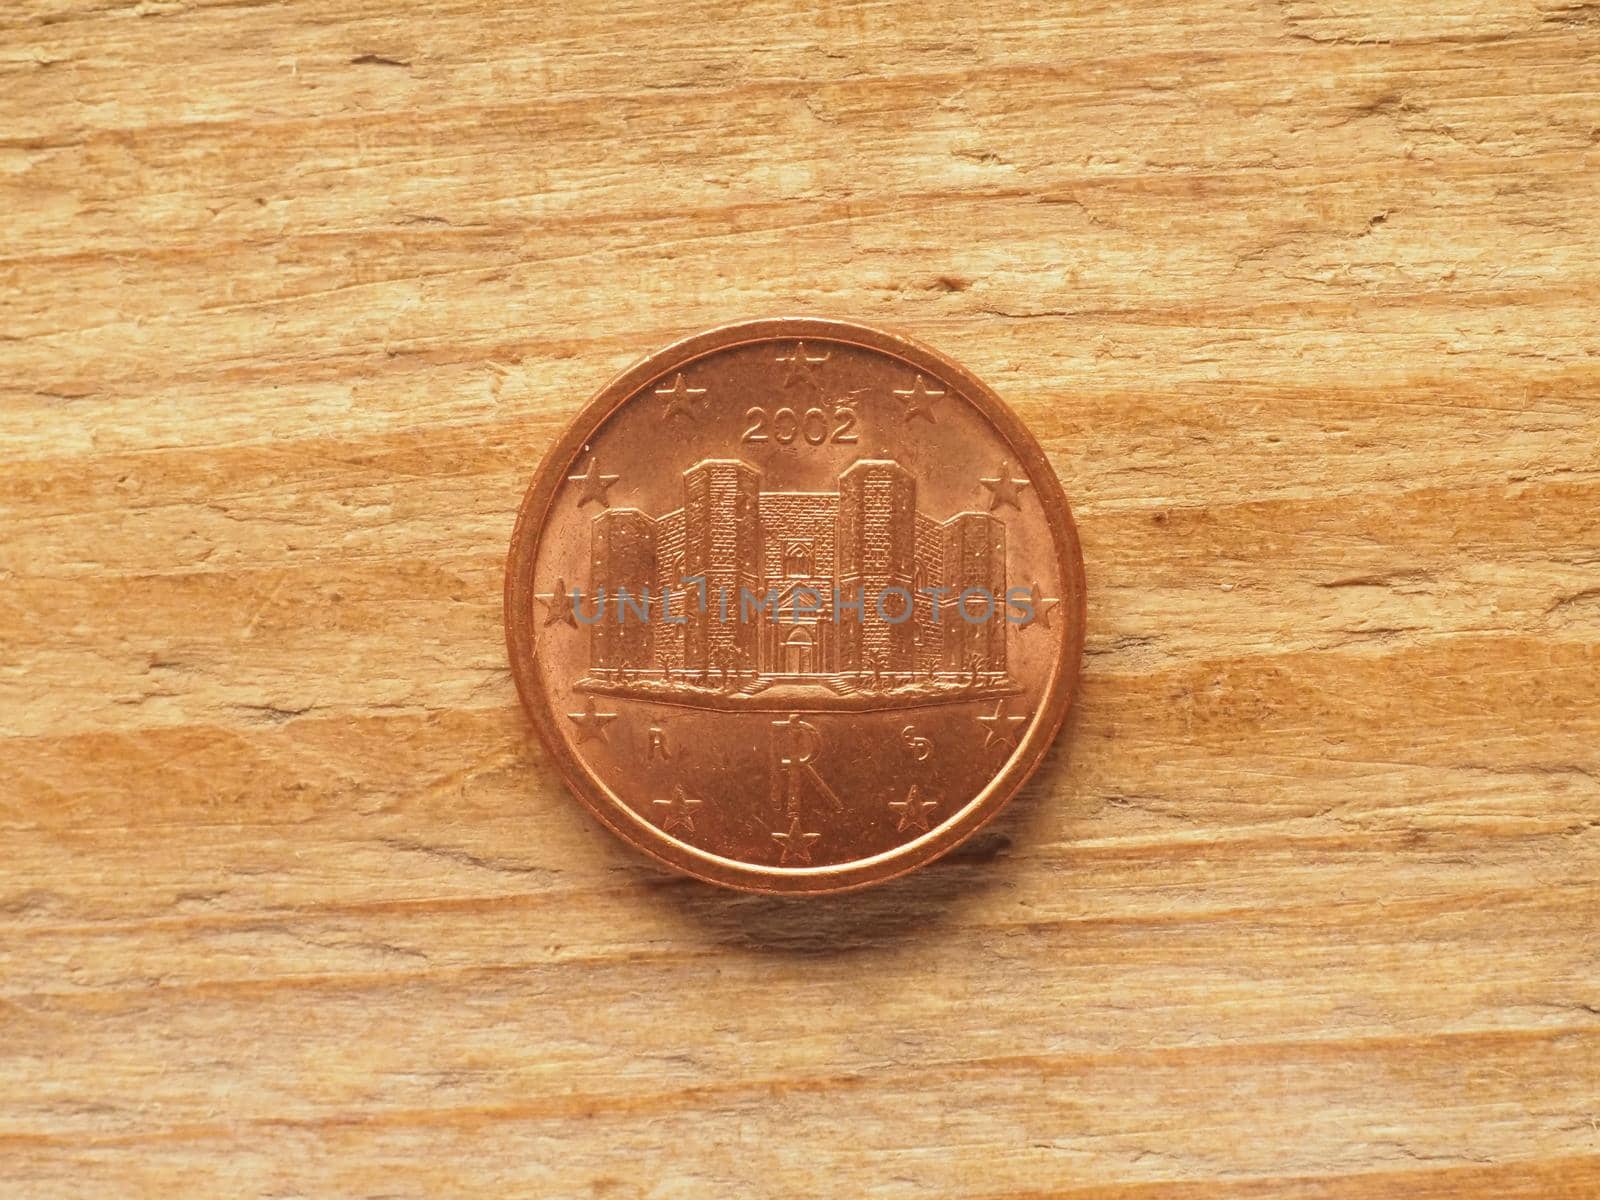 one cent coin, Italian side showing Castel del Monte in Andria currency of Italy, European Union